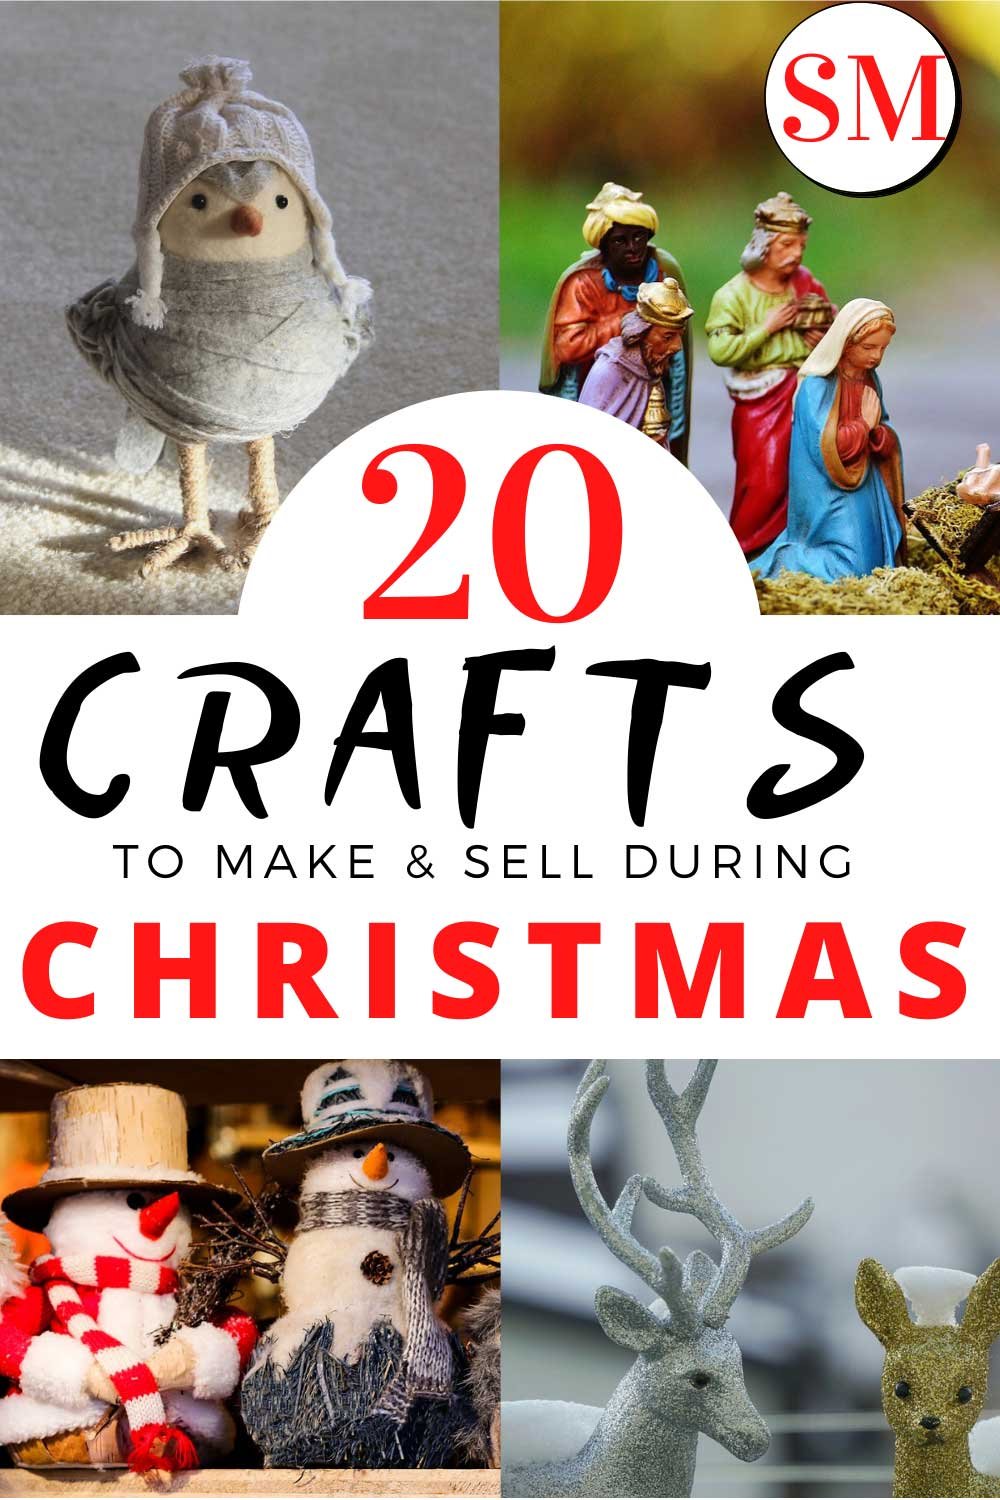 CHRISTMAS-CRAFTS-TO-SELL-SPROUTMENTOR-PIN-IMAGE